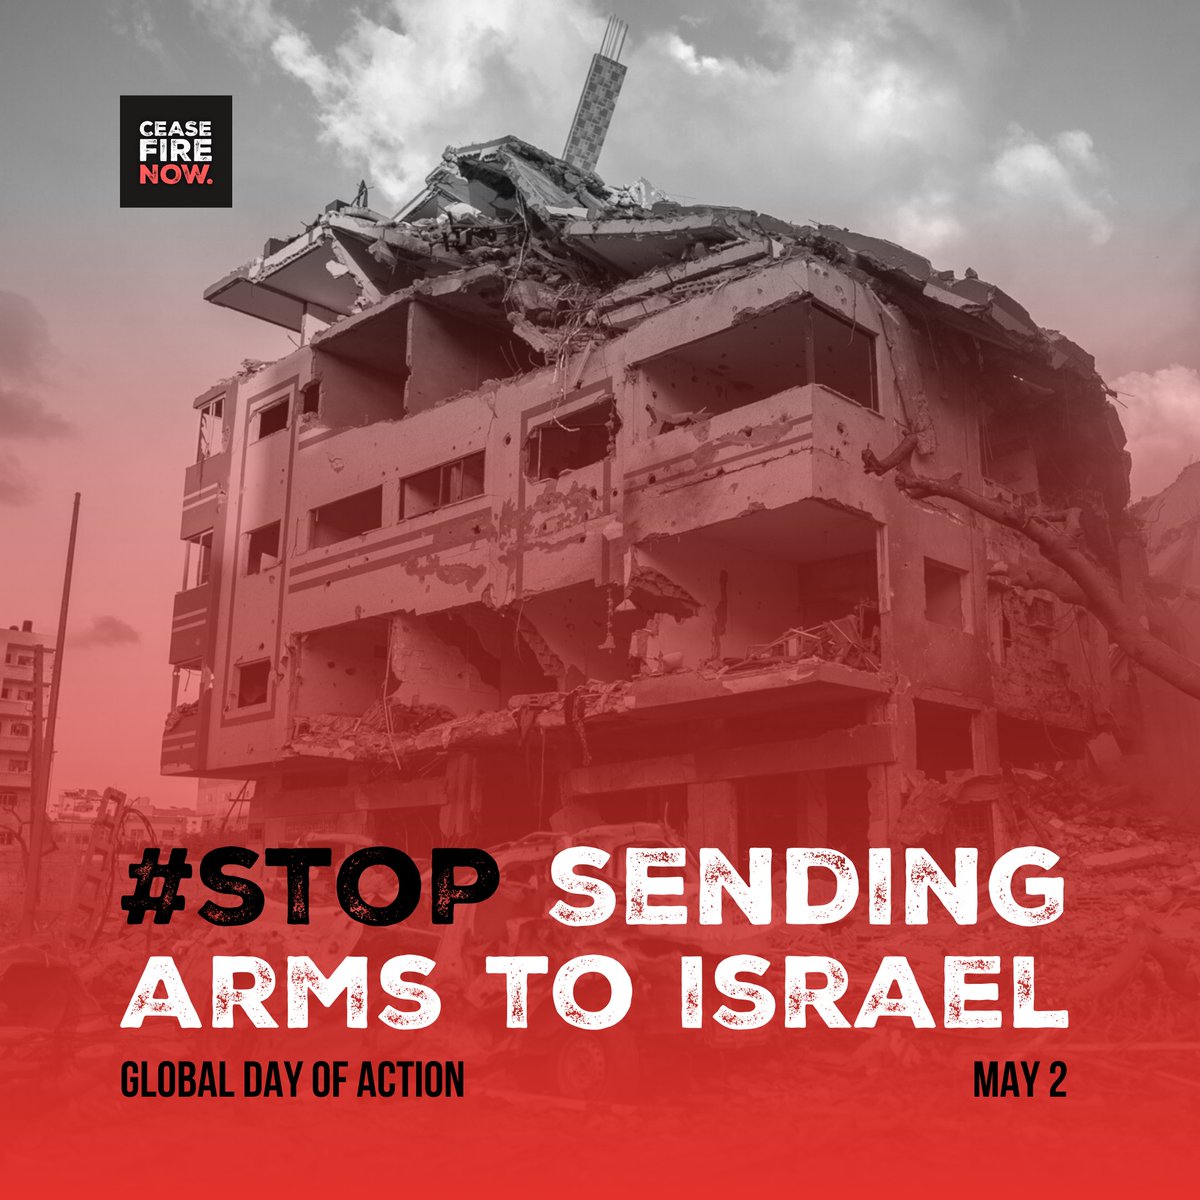 Today is the Global Day of Action to stop sending arms to Israel. 🛑Arms sales and transfers to Israel must stop and steps towards an immediate sustained ceasefire must begin. 🔗 Sign and share the petition: amnesty.ca/ceasefire #StopSendingArms #CeasefireNOW